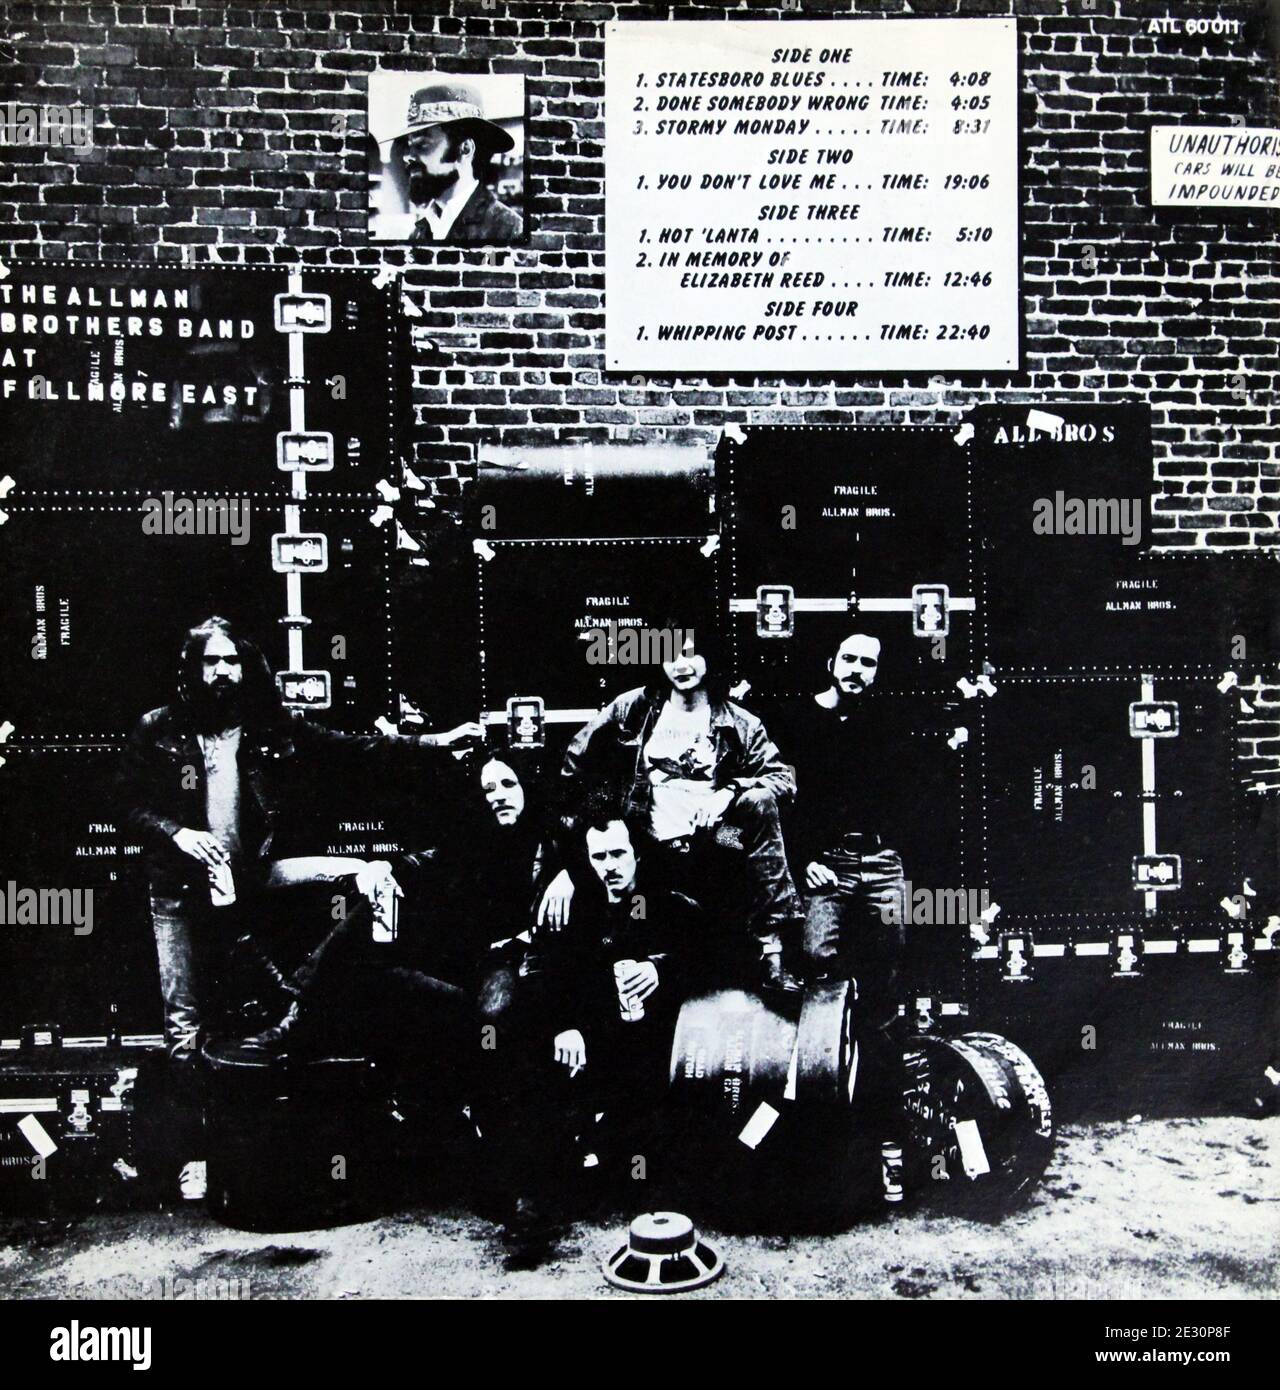 The Allman Brothers Band: 1971. live double LP back cover: At Fillmore